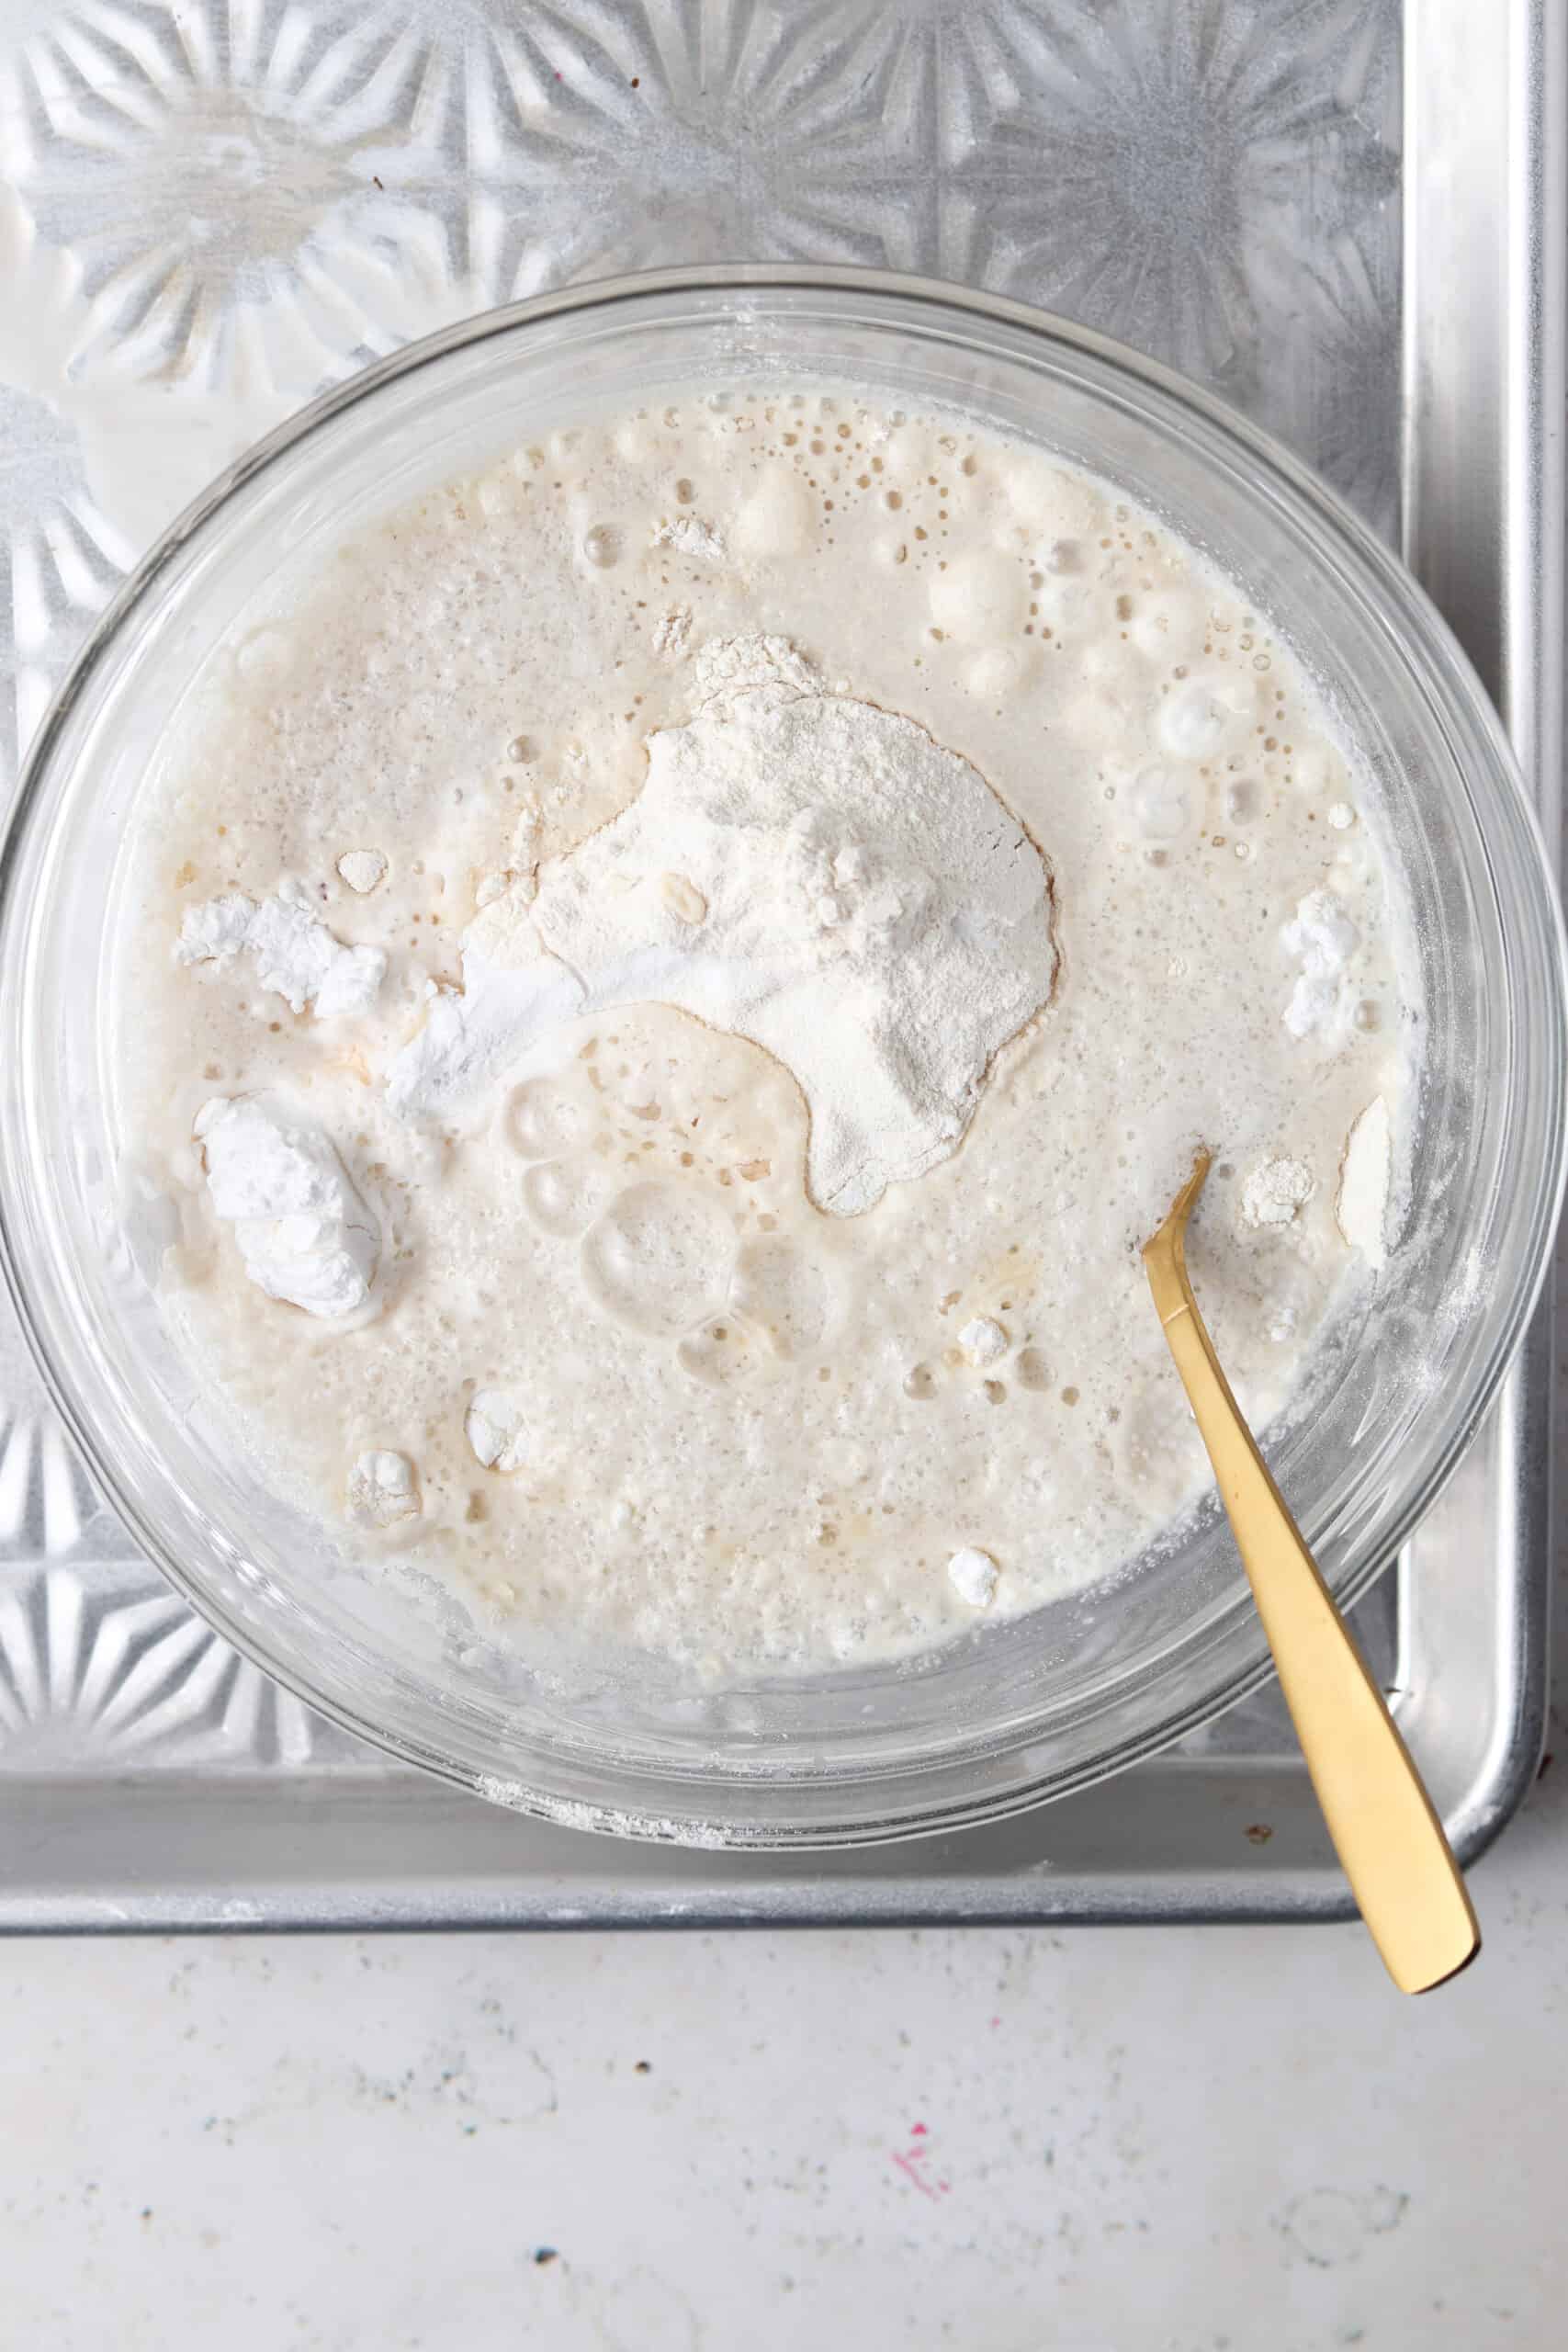 Cassava flour, tapioca flour, baking powder, banana, coconut milk, vanilla extract, cinnamon, pure maple syrup, and water in a glass mixing bowl on a silver platter with a gold fork in it.